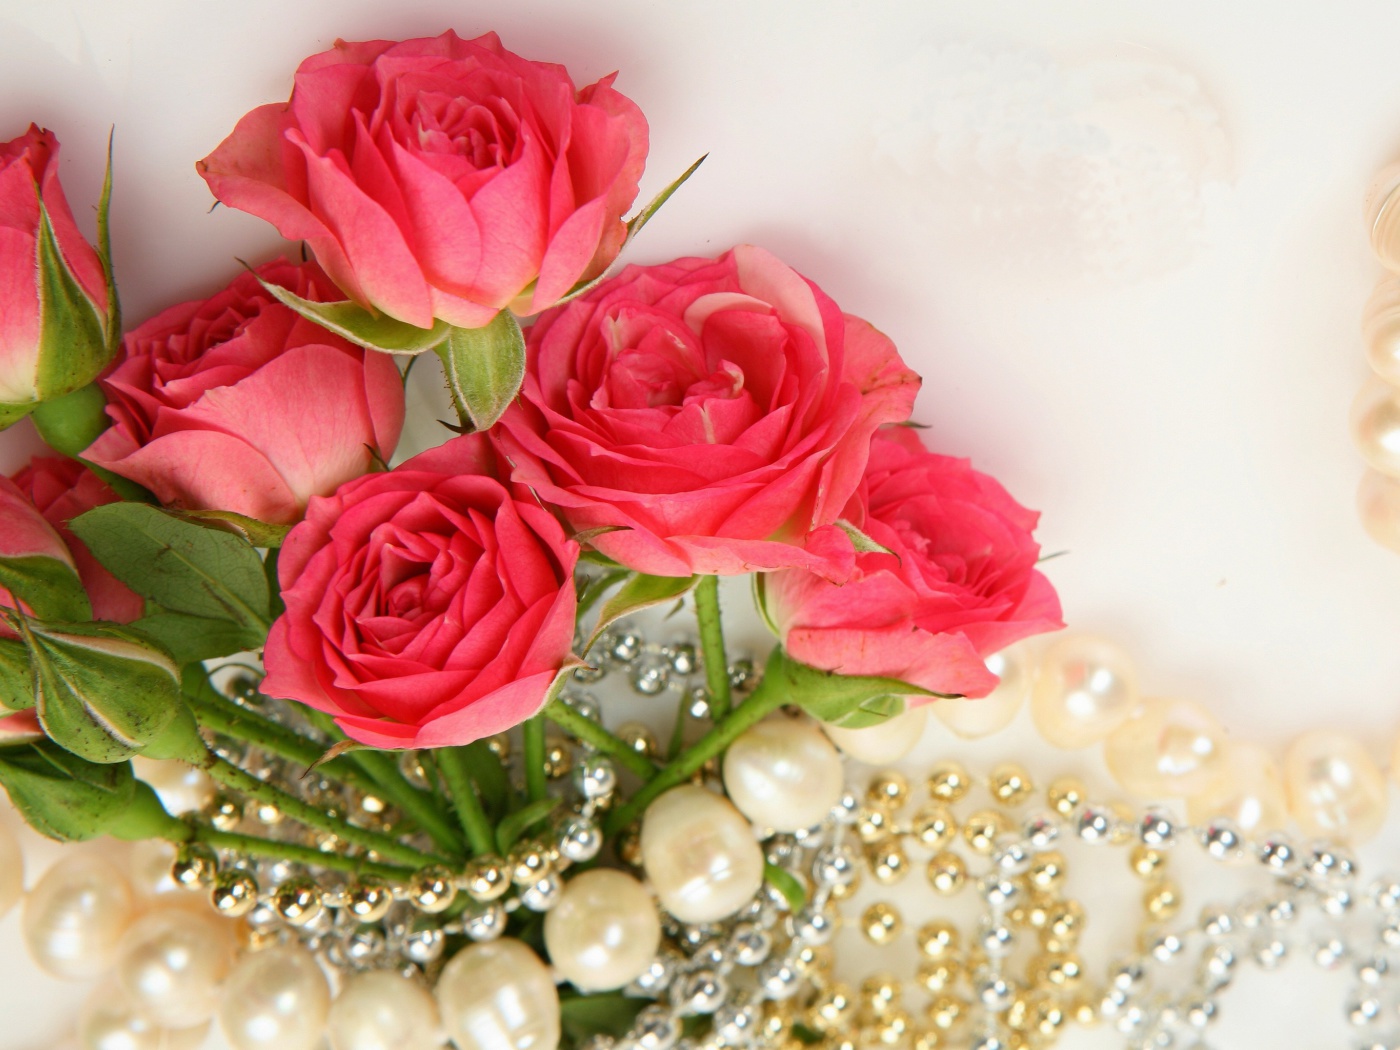 Necklace and Roses Bouquet wallpaper 1400x1050